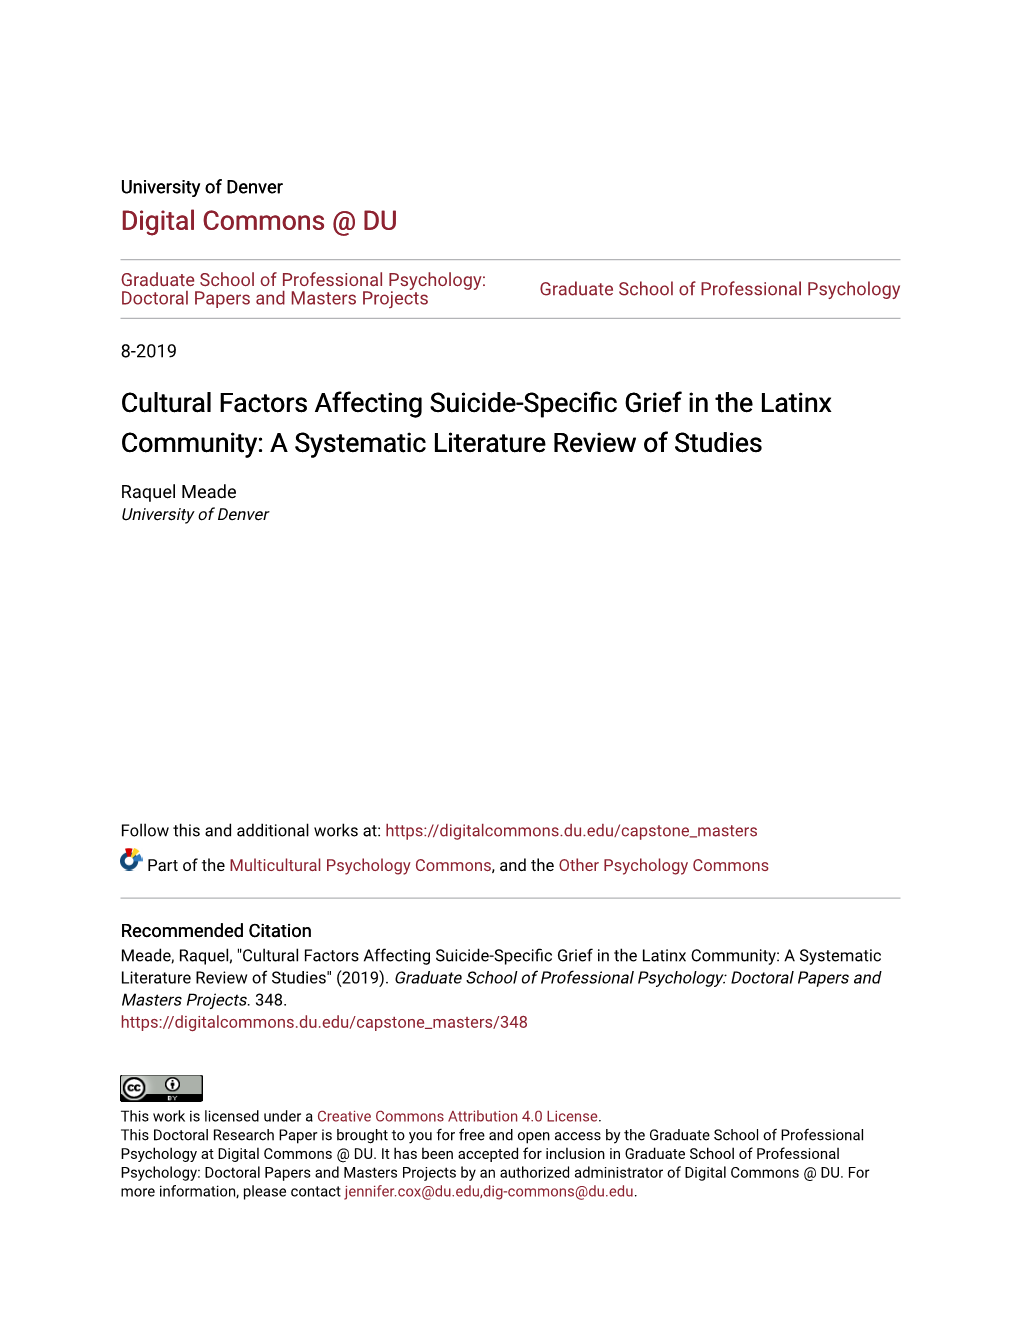 Cultural Factors Affecting Suicide-Specific Grief in the Latinx Community: a Systematic Literature Review of Studies